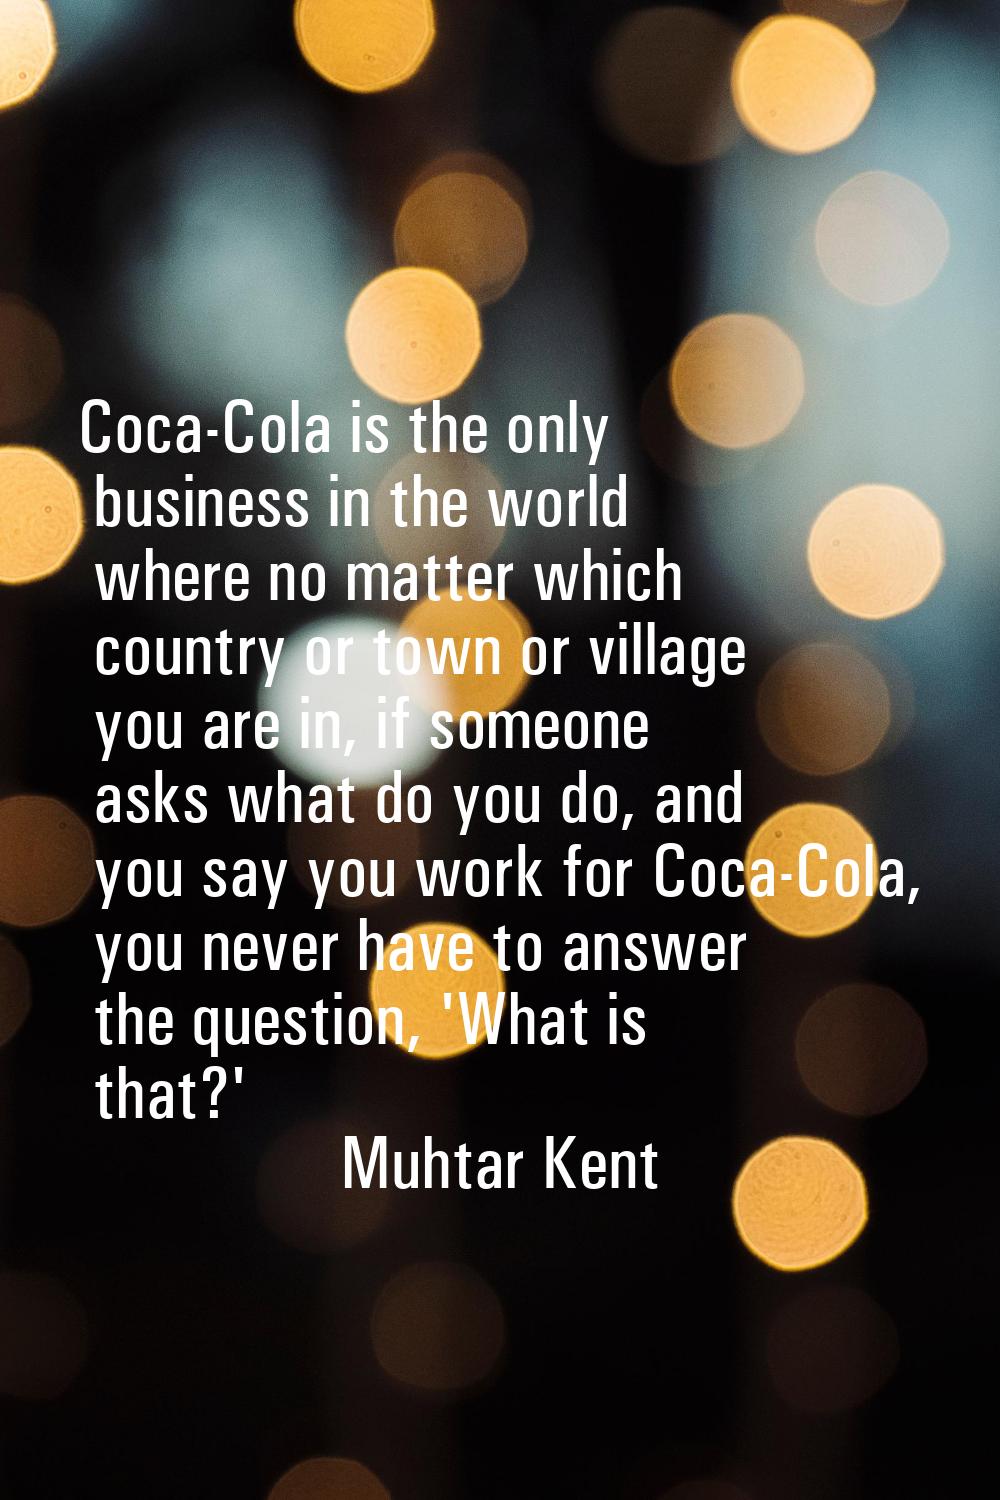 Coca-Cola is the only business in the world where no matter which country or town or village you ar